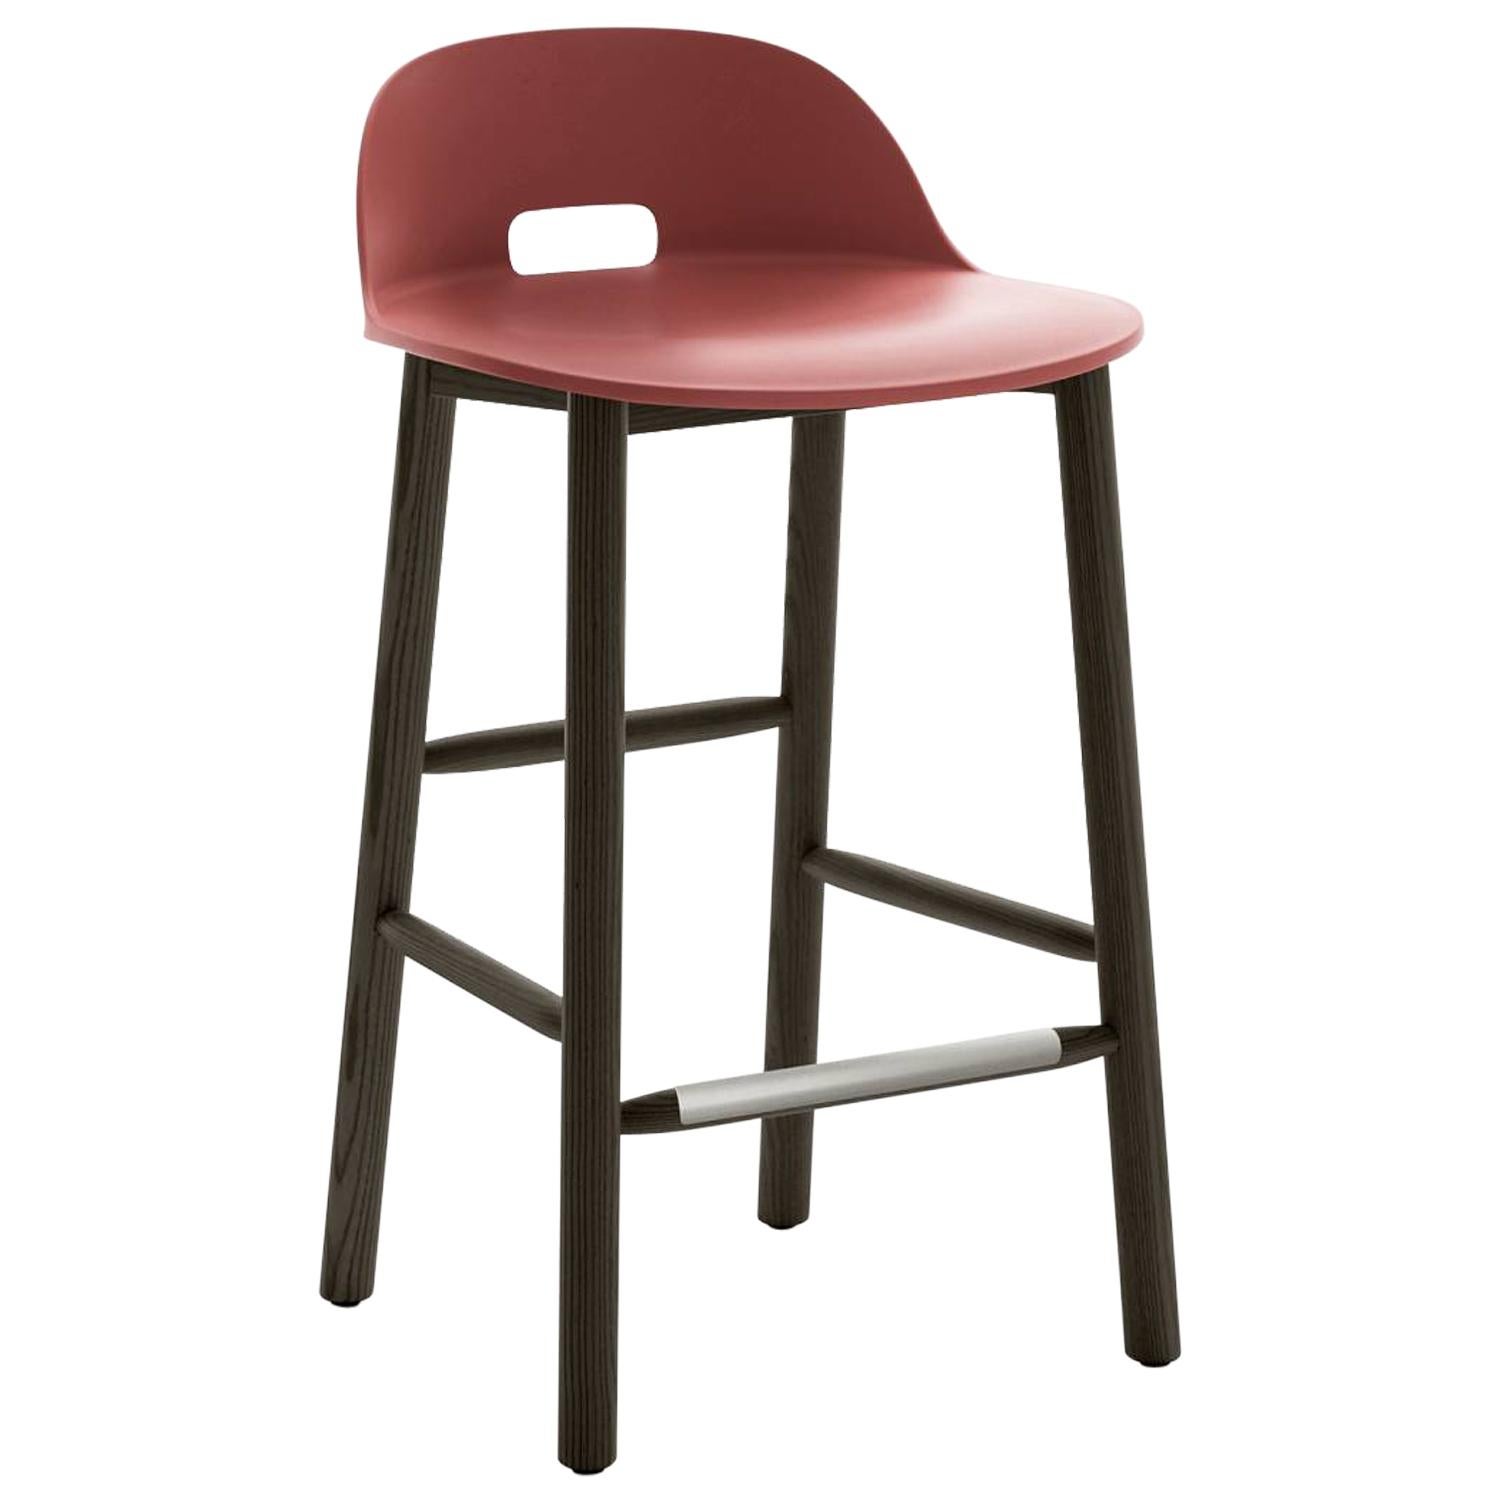 Emeco Alfi Counter Stool in Red and Dark Ash with Low Back by Jasper Morrison